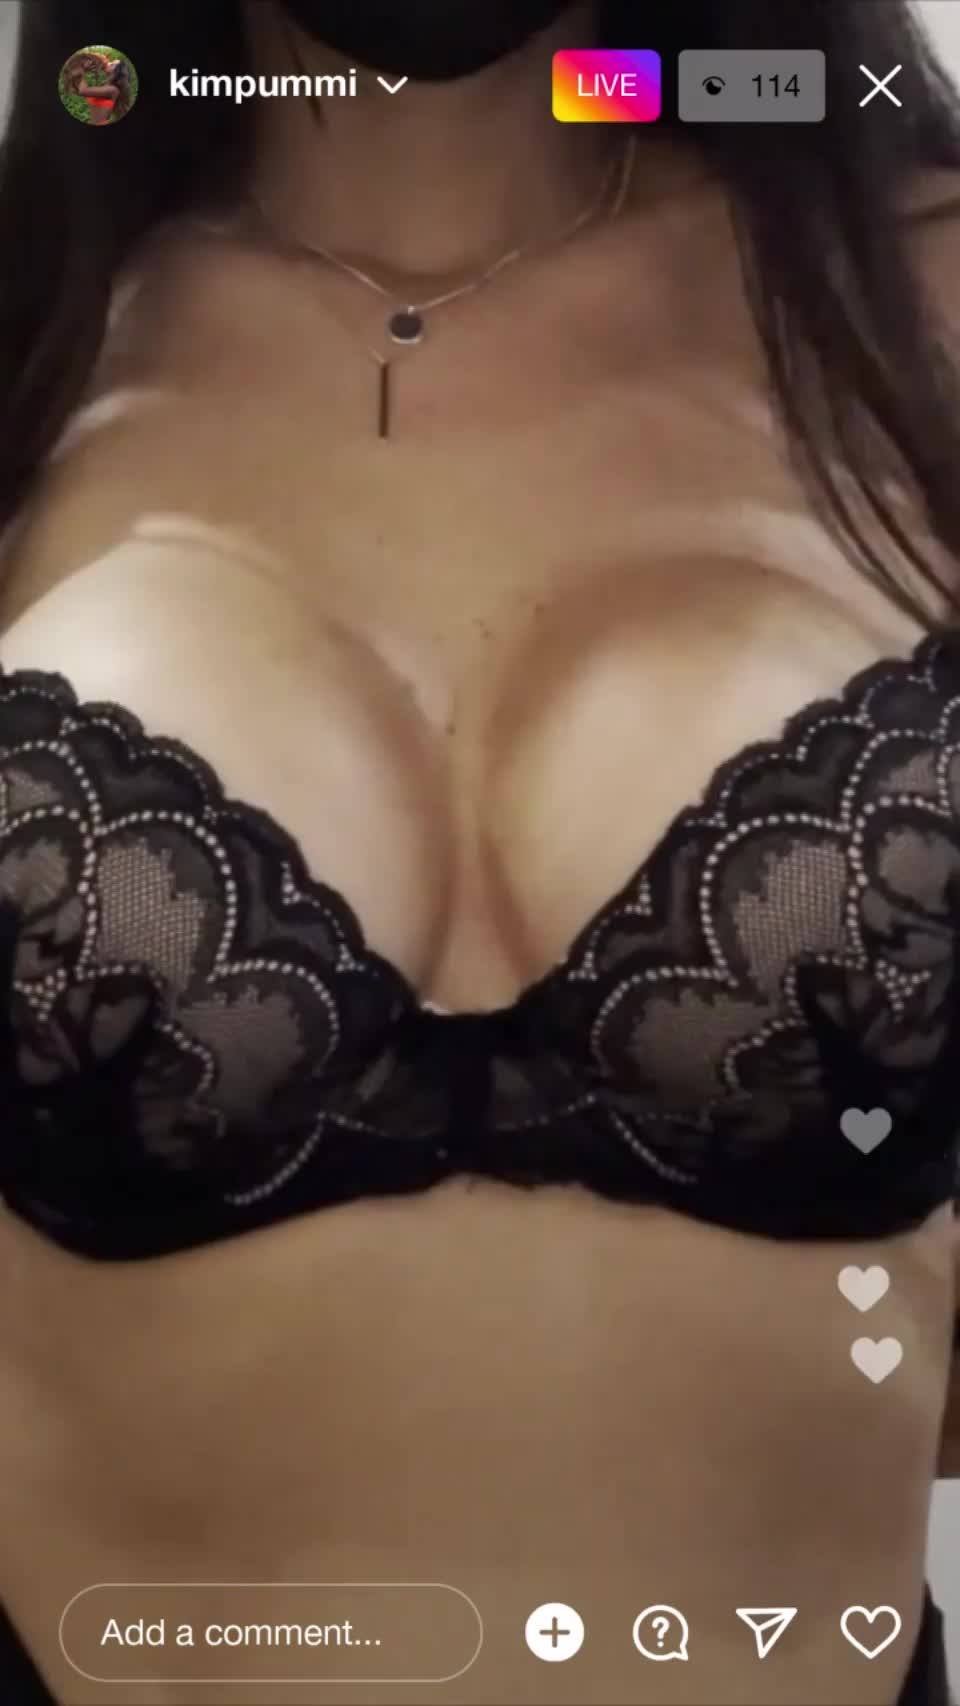 LIVE IG, Sher kept edging all day long 🤤 : video clip